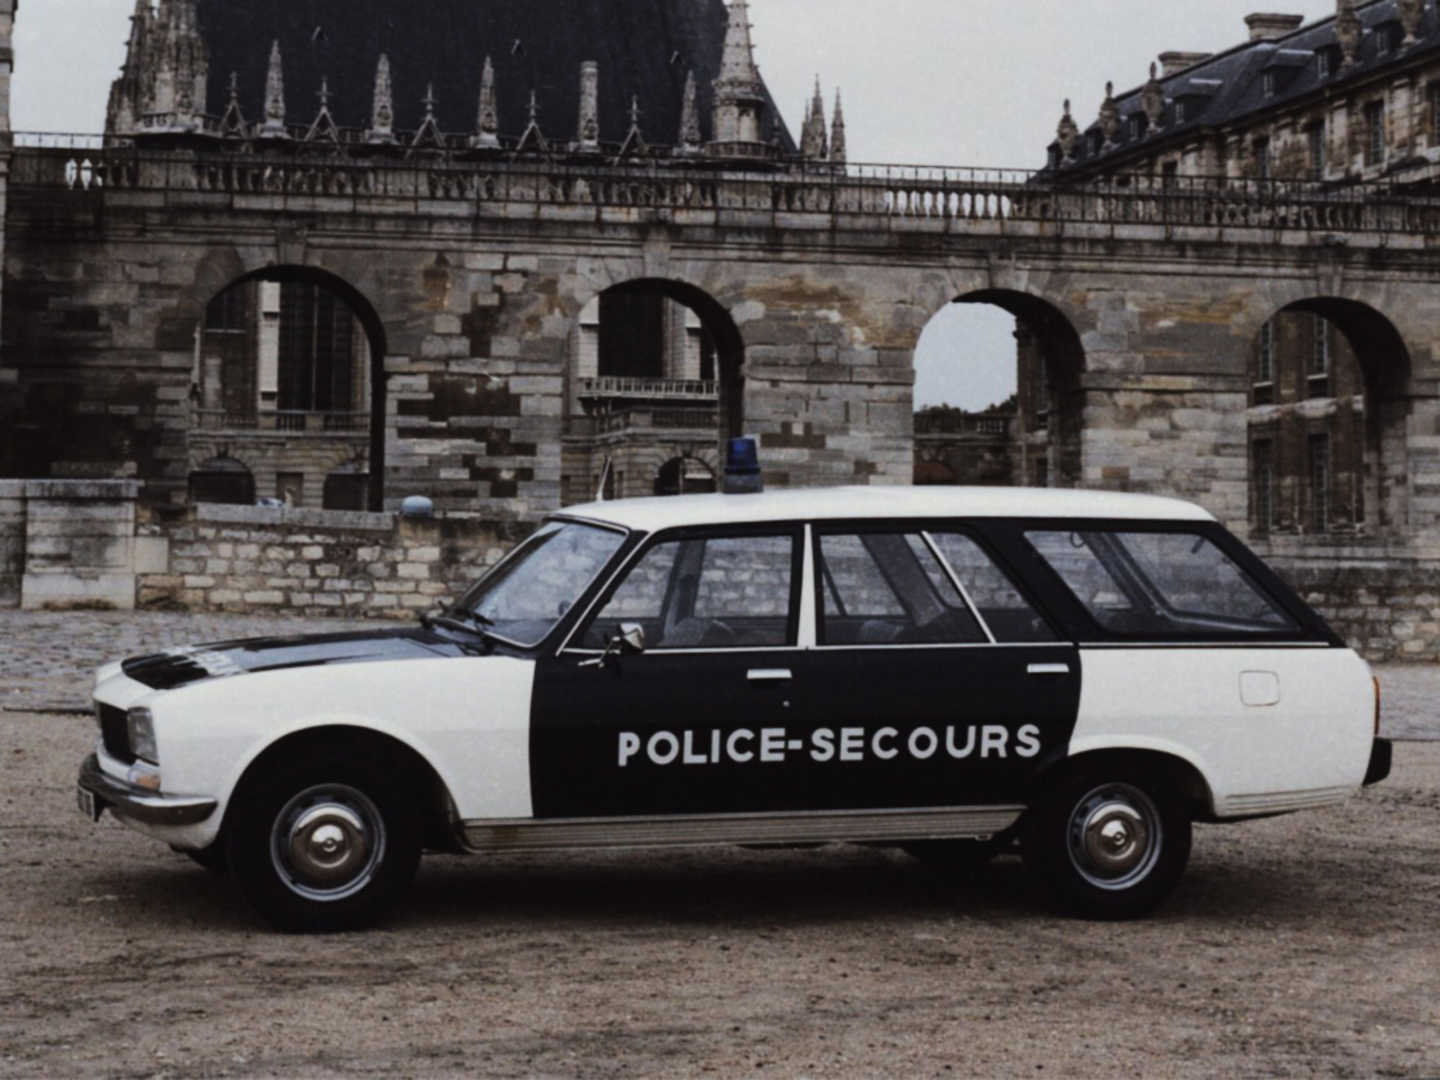 Peugeot 504 Police-secours